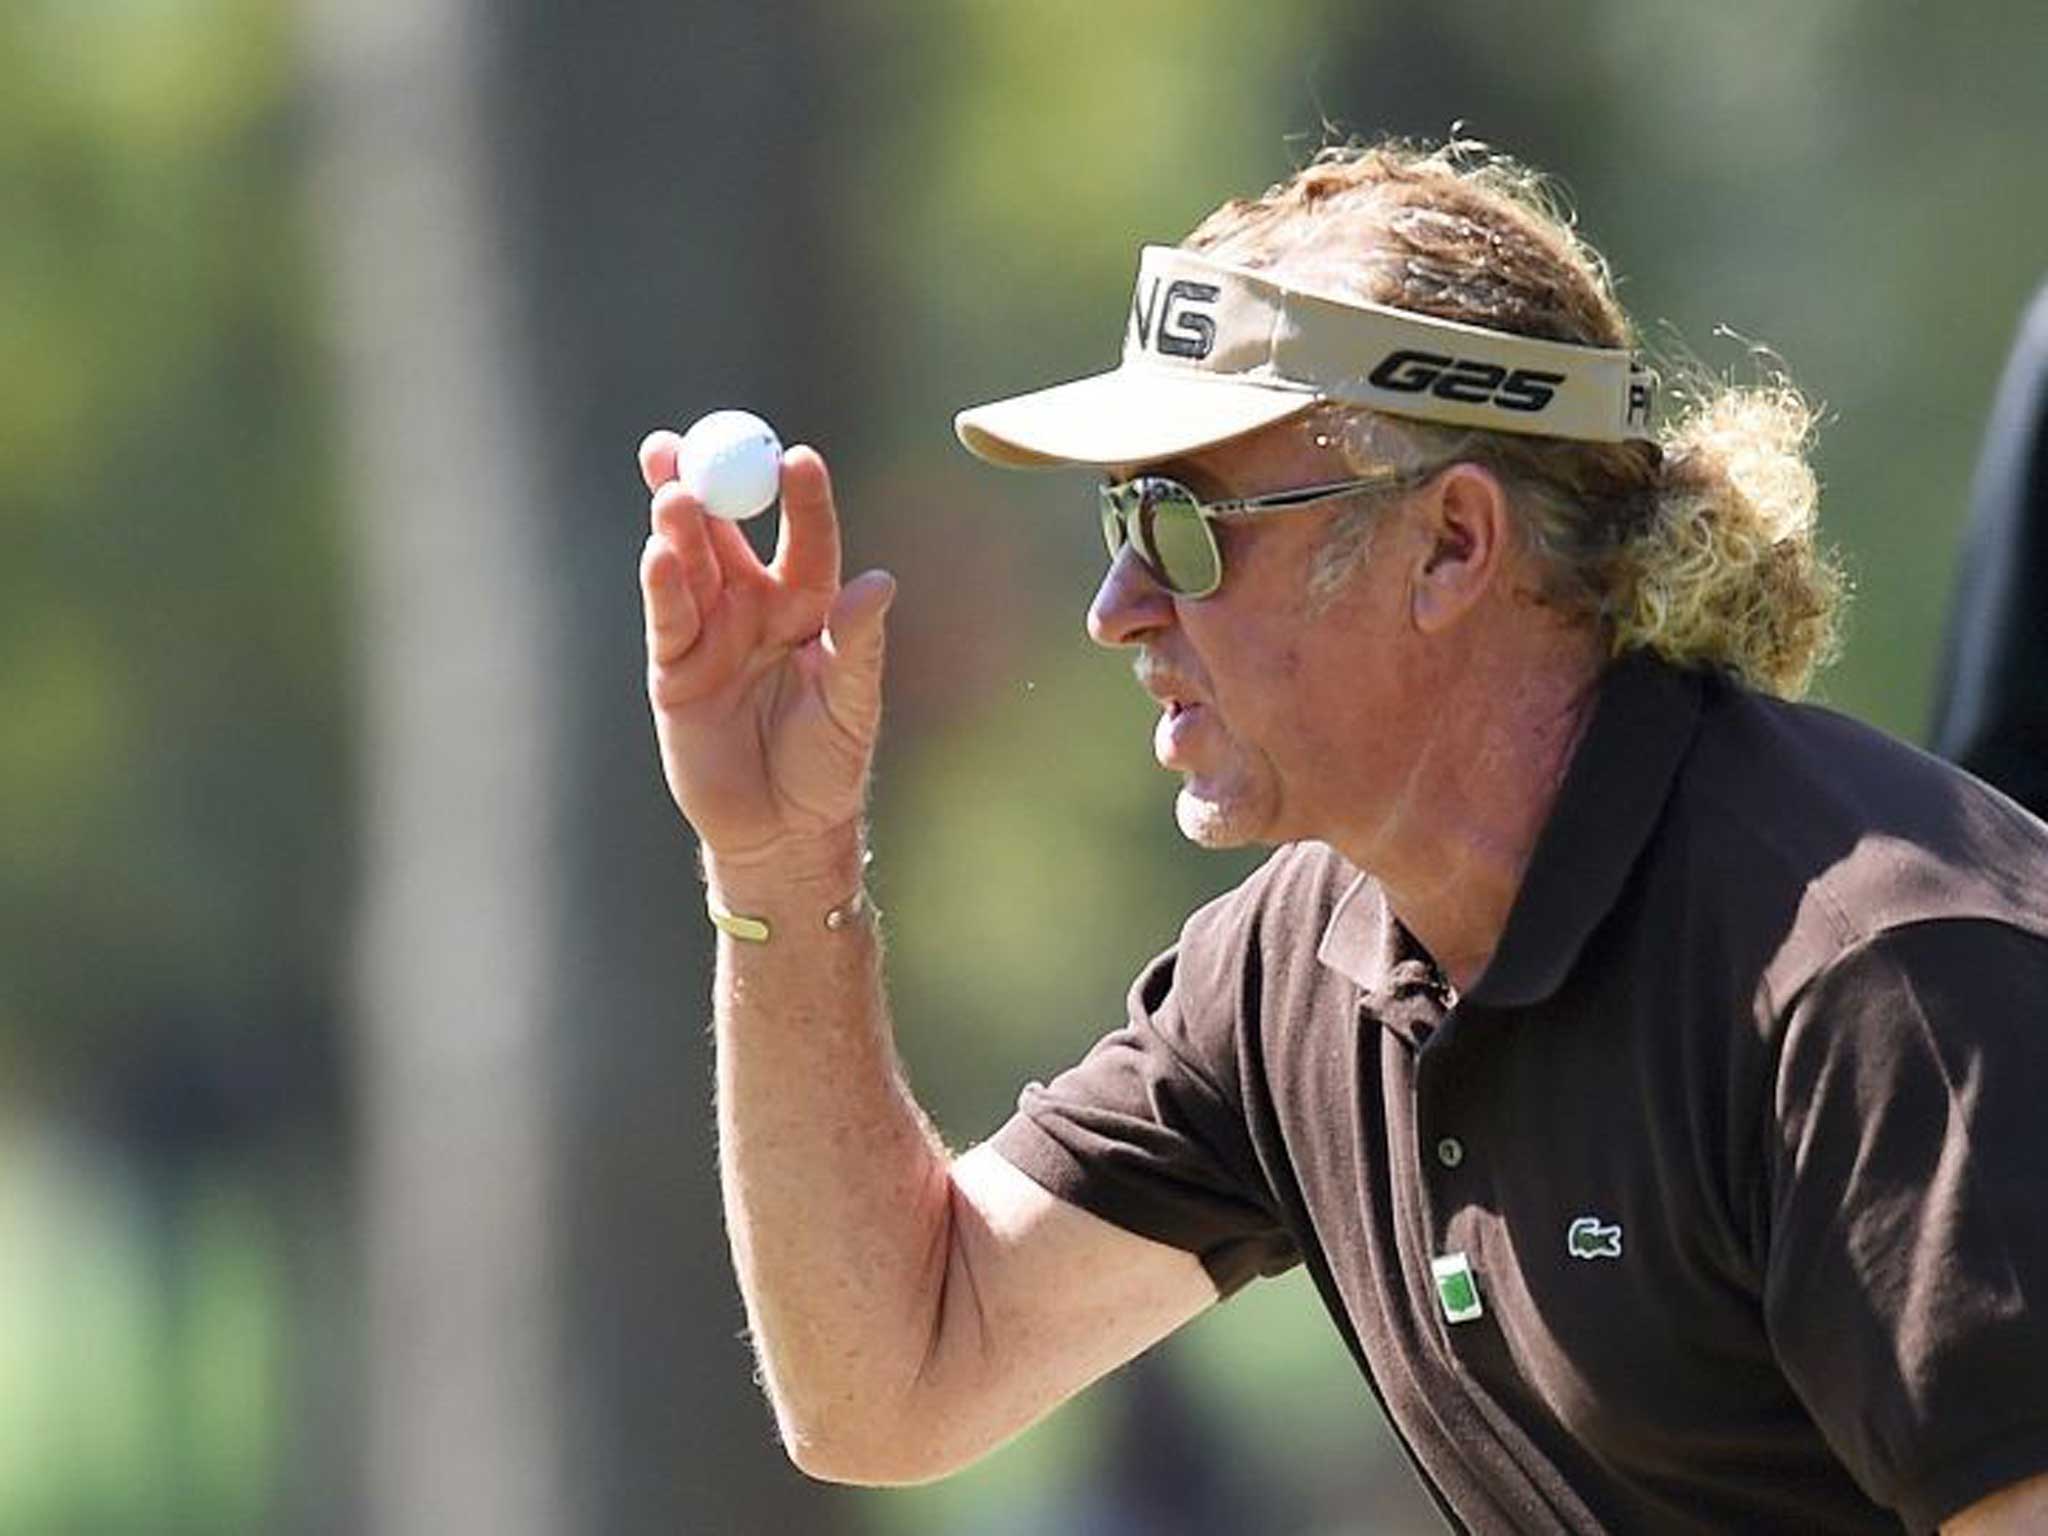 Eye on the ball: Jimenez showed he has lost none of his old cunning